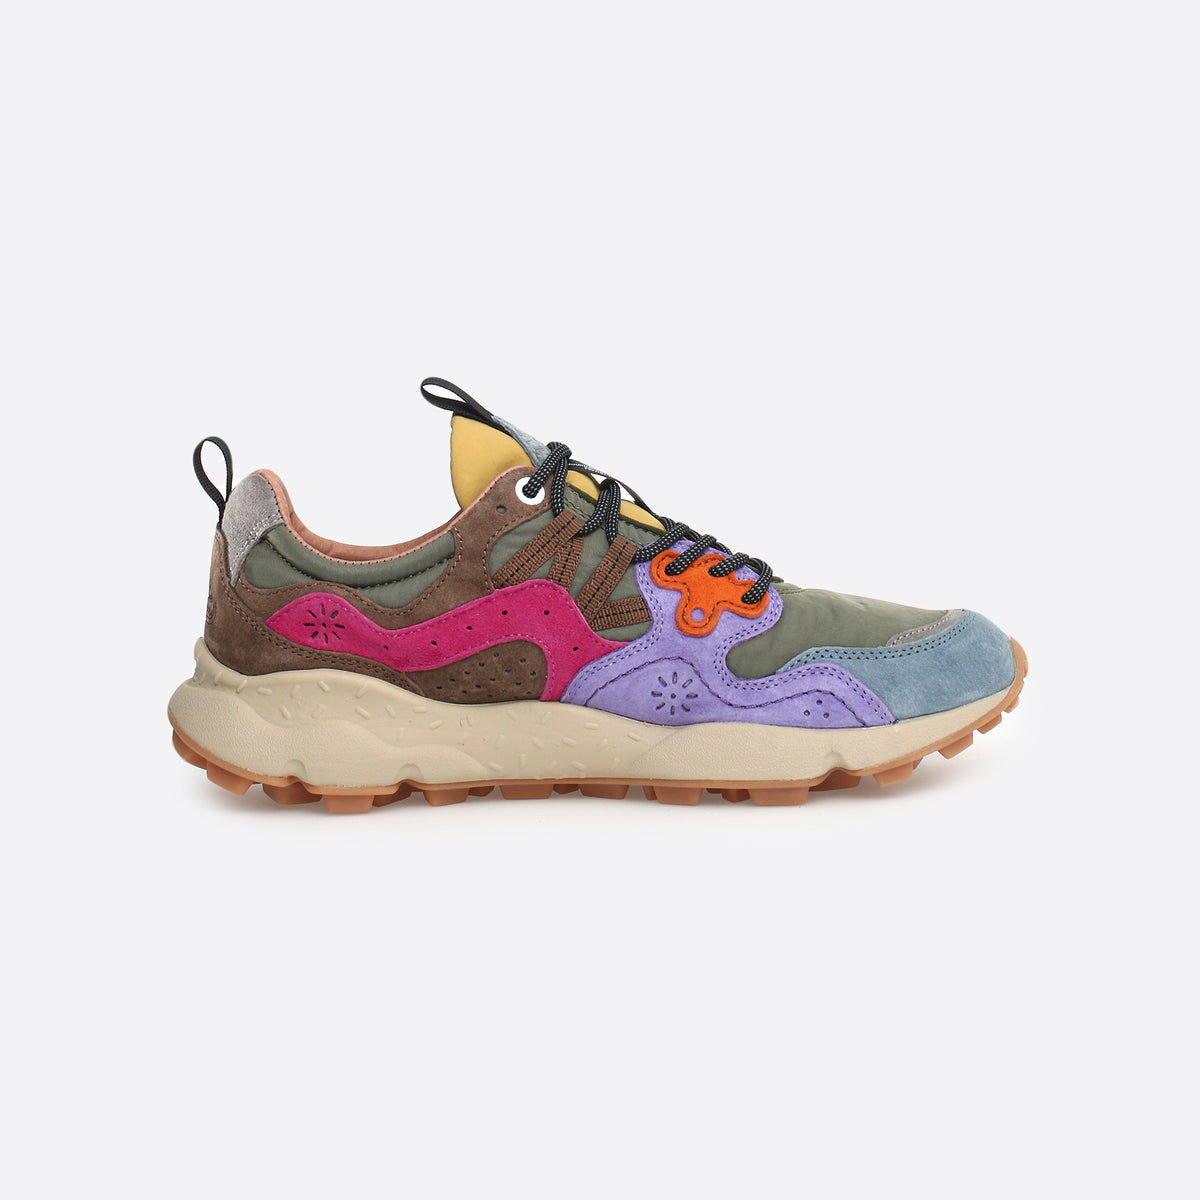 Flower Mountain Yamano 3 Trainers in Kaki / Multi – Our Daily Edit.